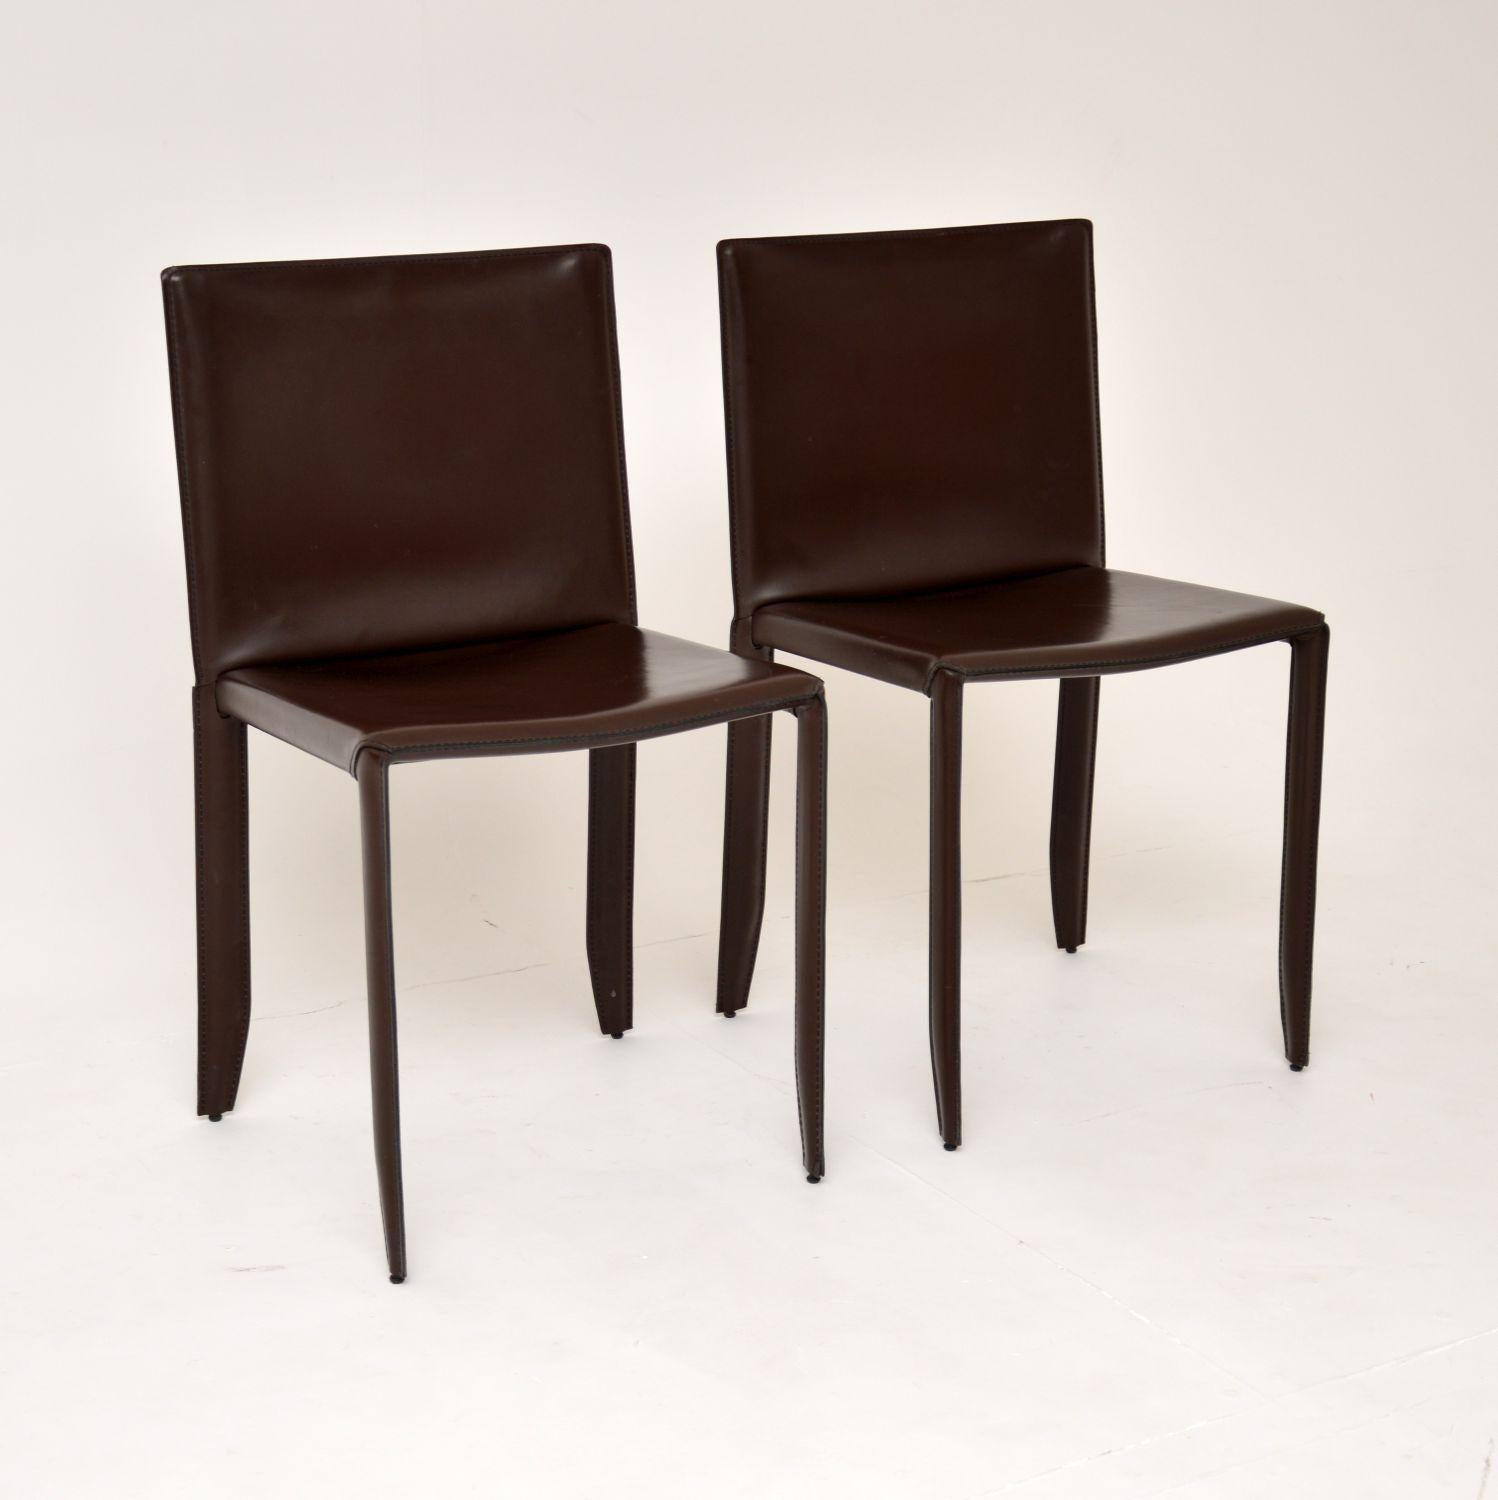 Mid-Century Modern Pair of Modernist Italian Leather Side Chairs by Cattelan Italia